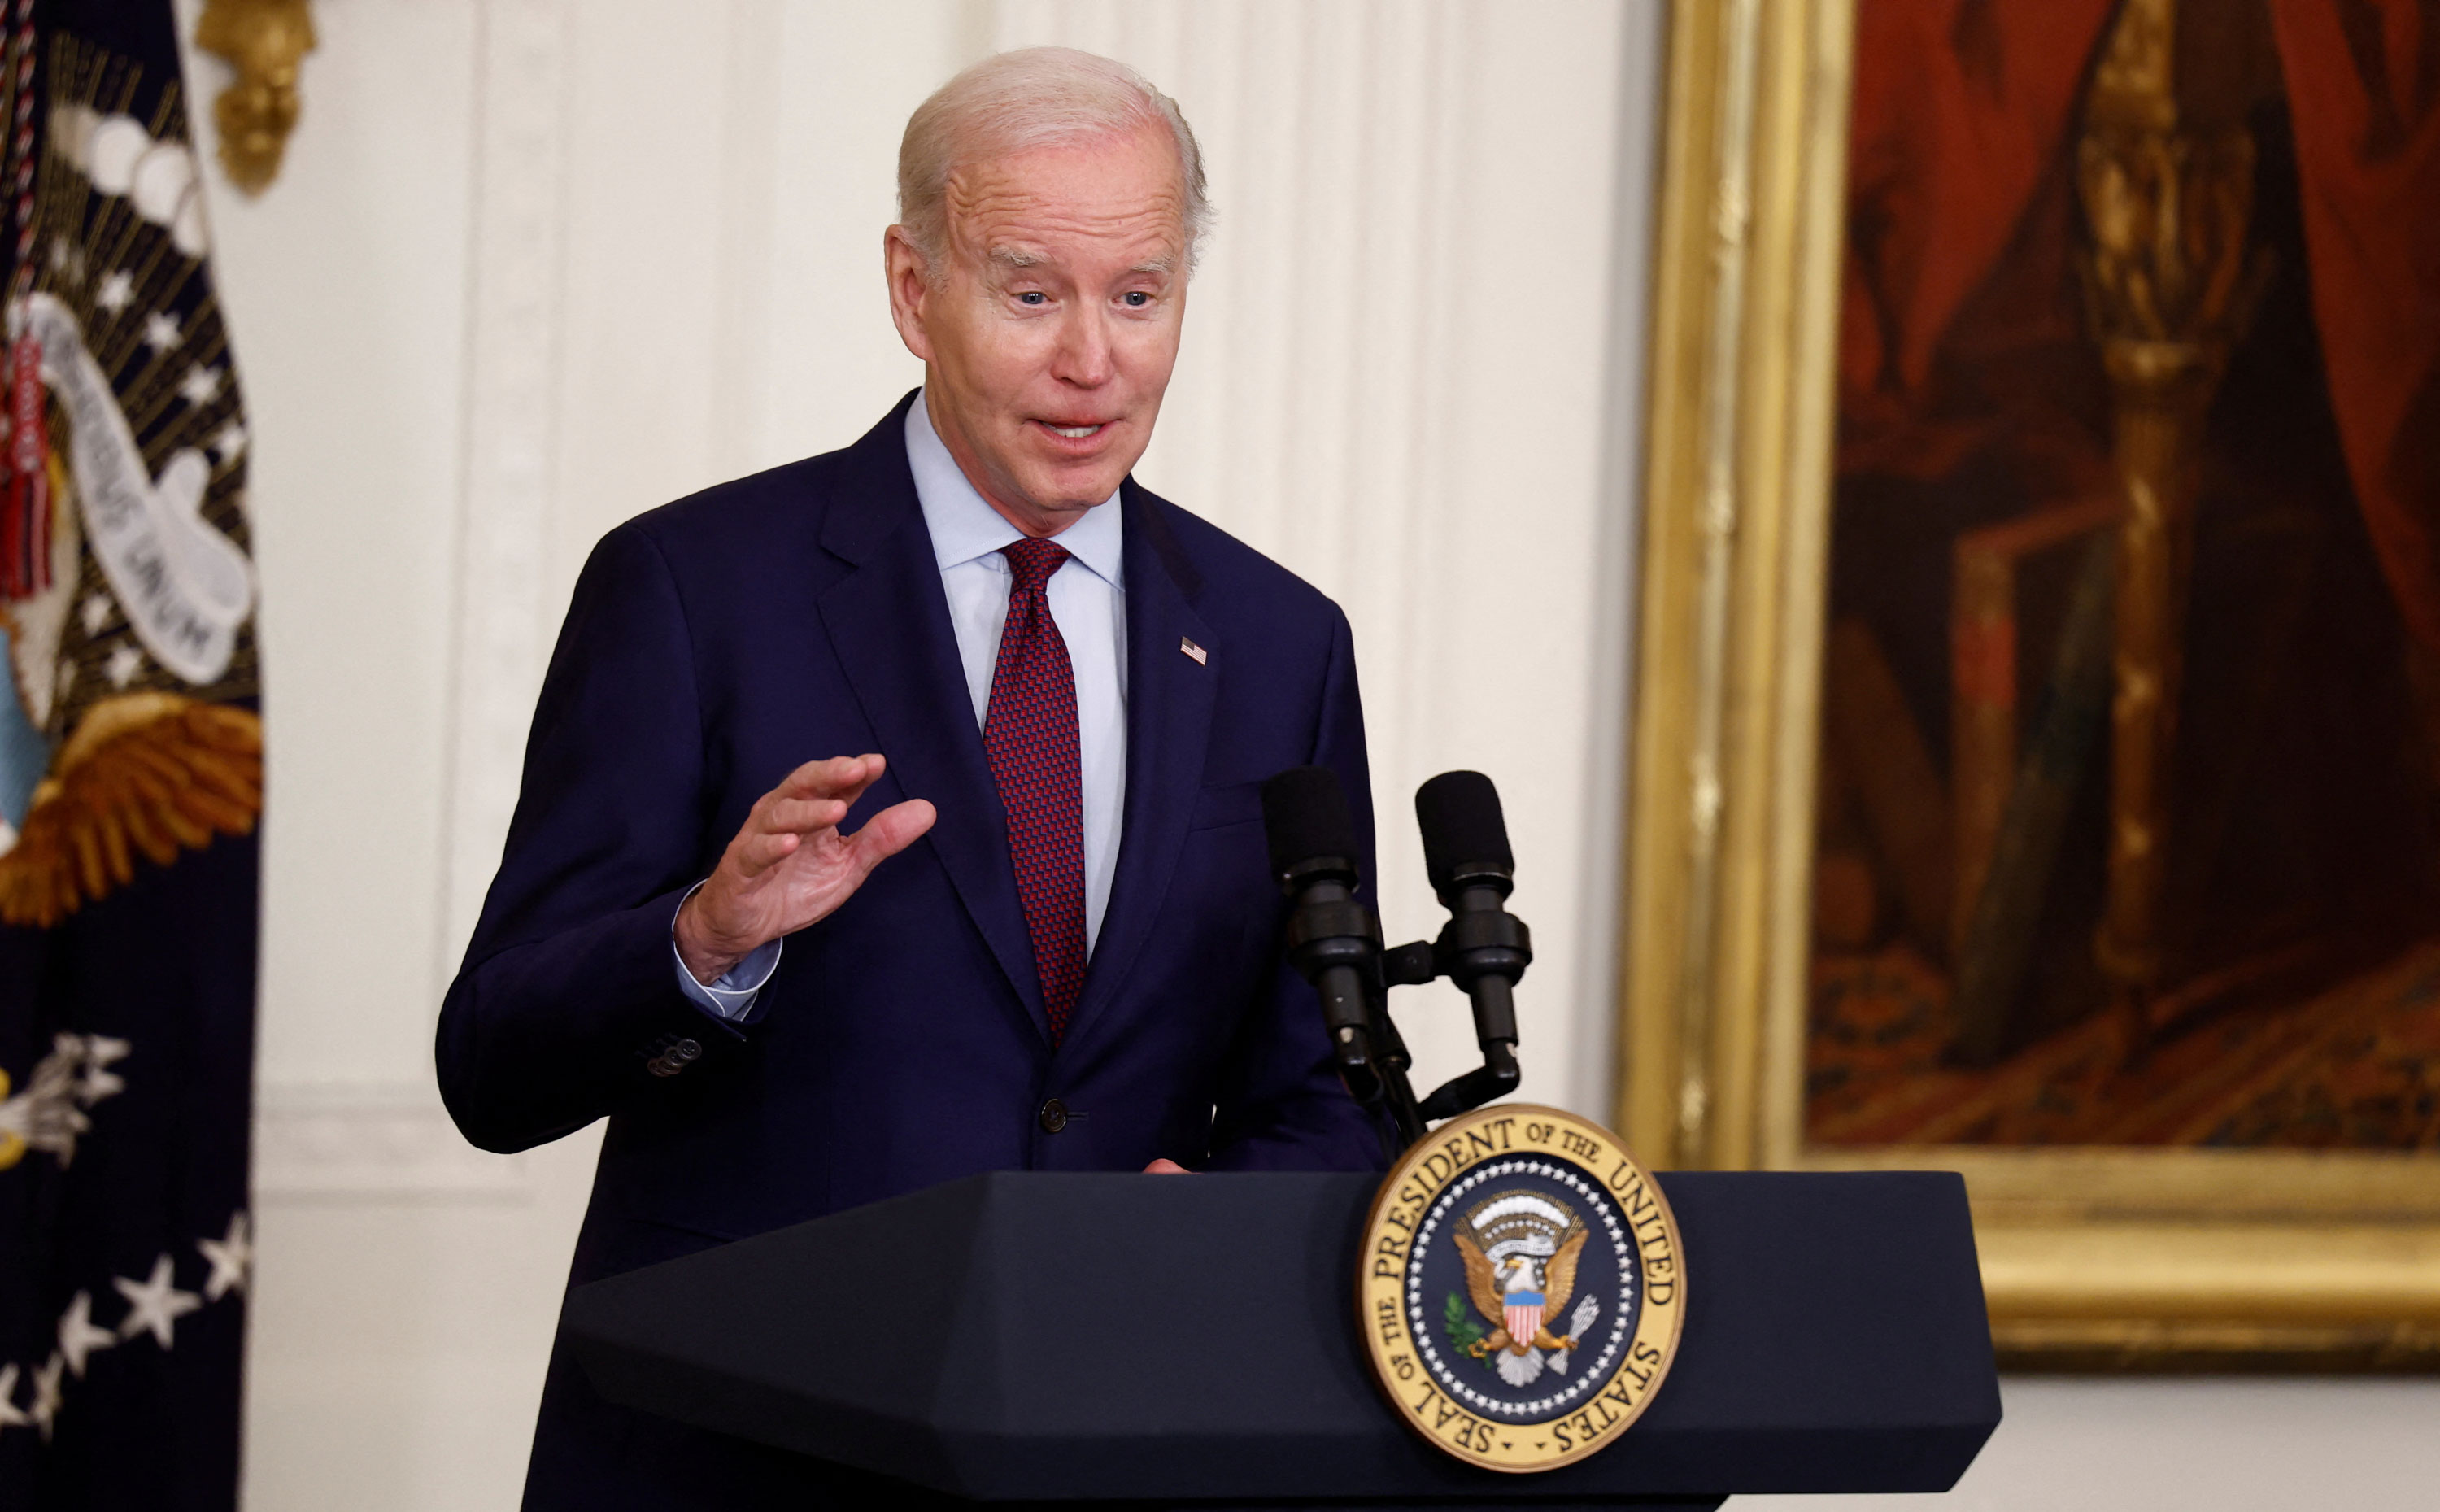 President Joe Biden announces that he is cutting his upcoming trip to Asia short and will return to Washington earlier than planned to continue debt ceiling negotiations, during his remarks at a Jewish American Heritage Month celebration at the White House in Washington, D.C., on May 16, 2023.